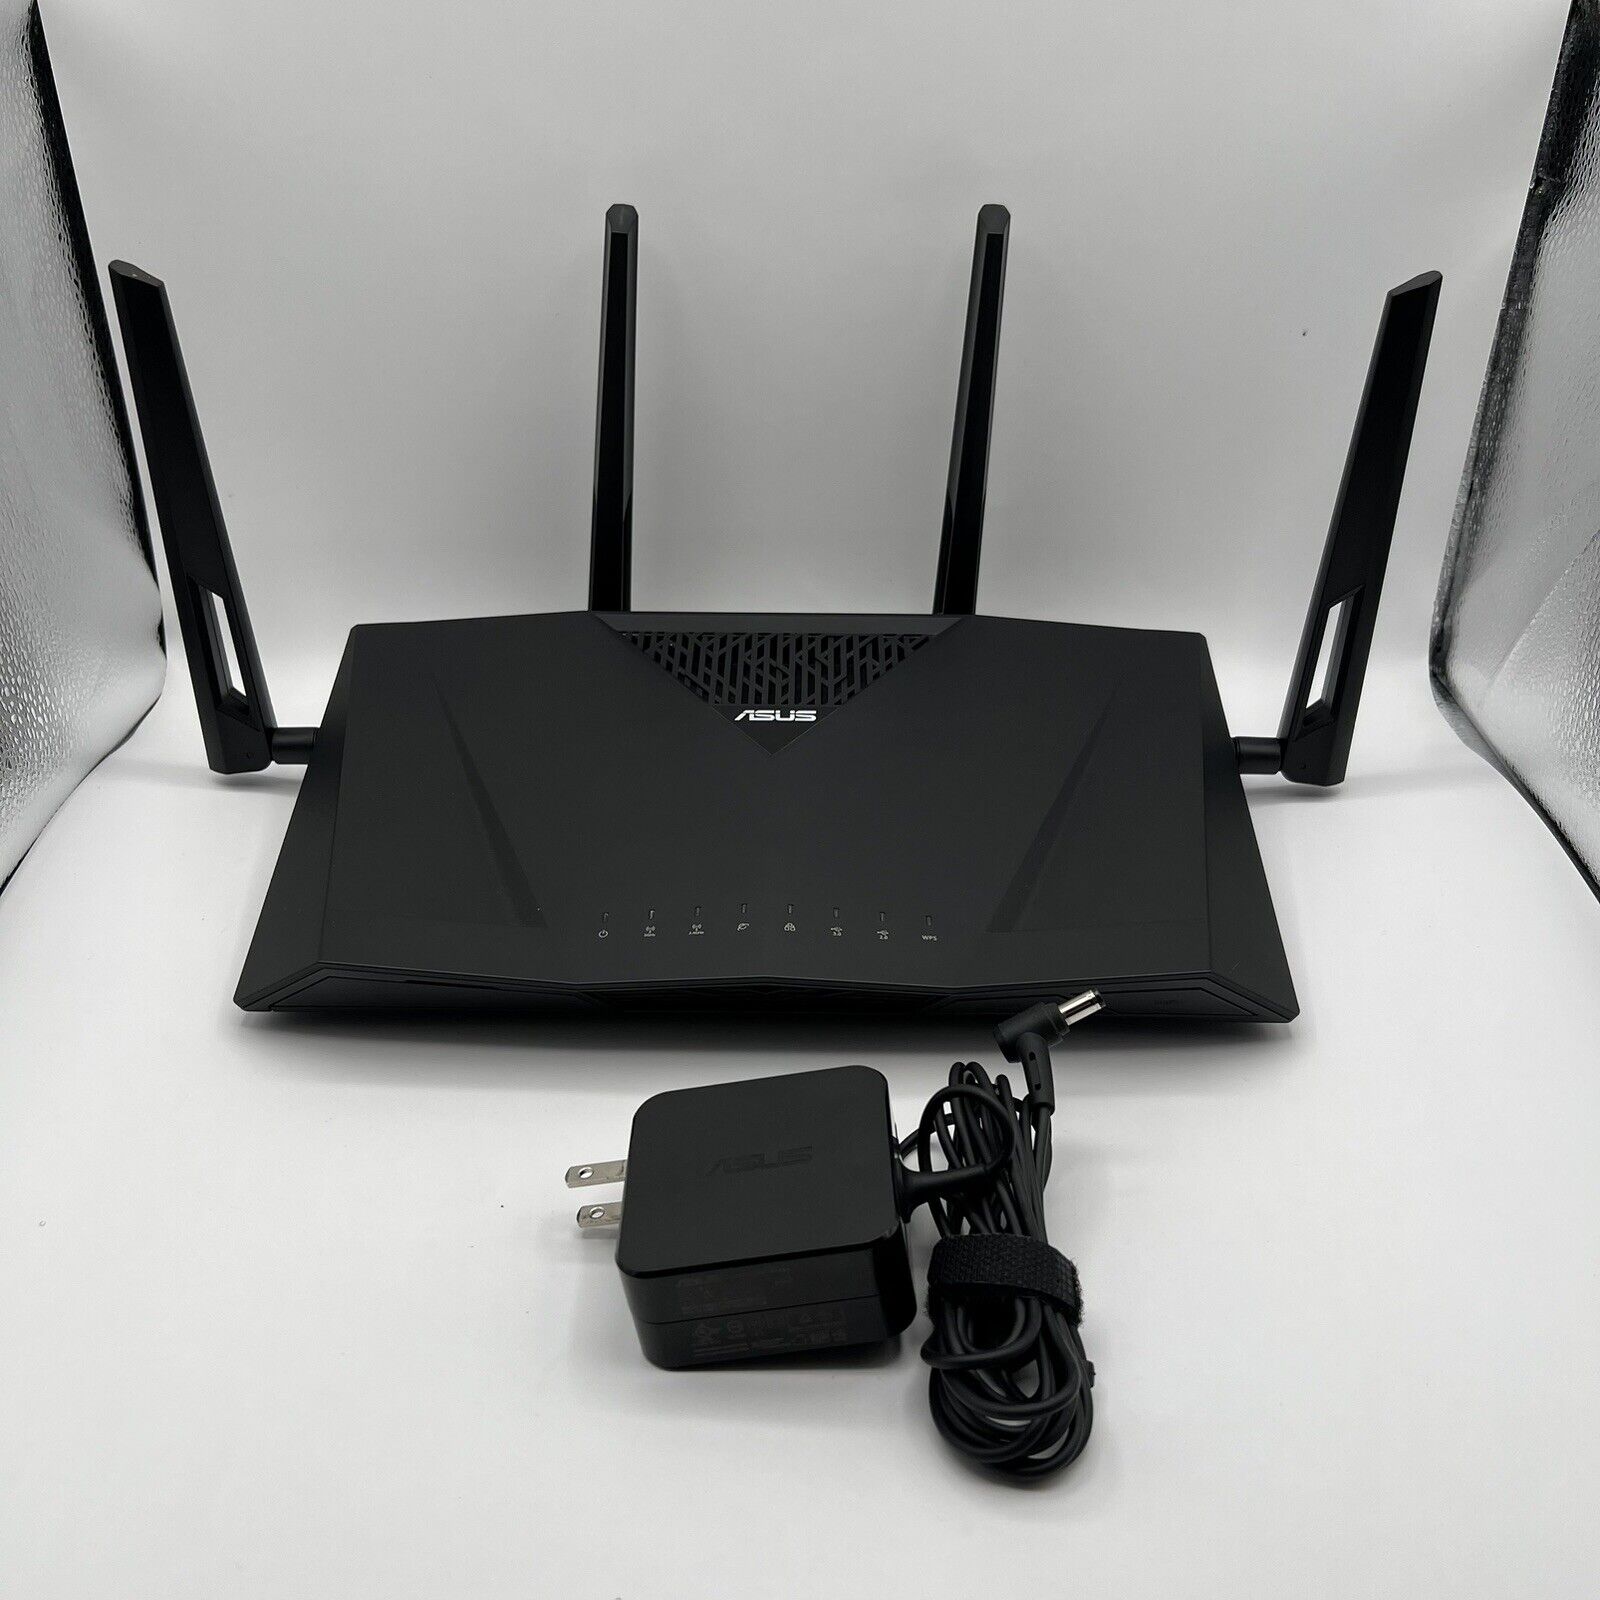 ASUS RT-AC3100 Dual-Band Gigabit  Router 2.4GHz 5.0GHz Wi-Fi Router